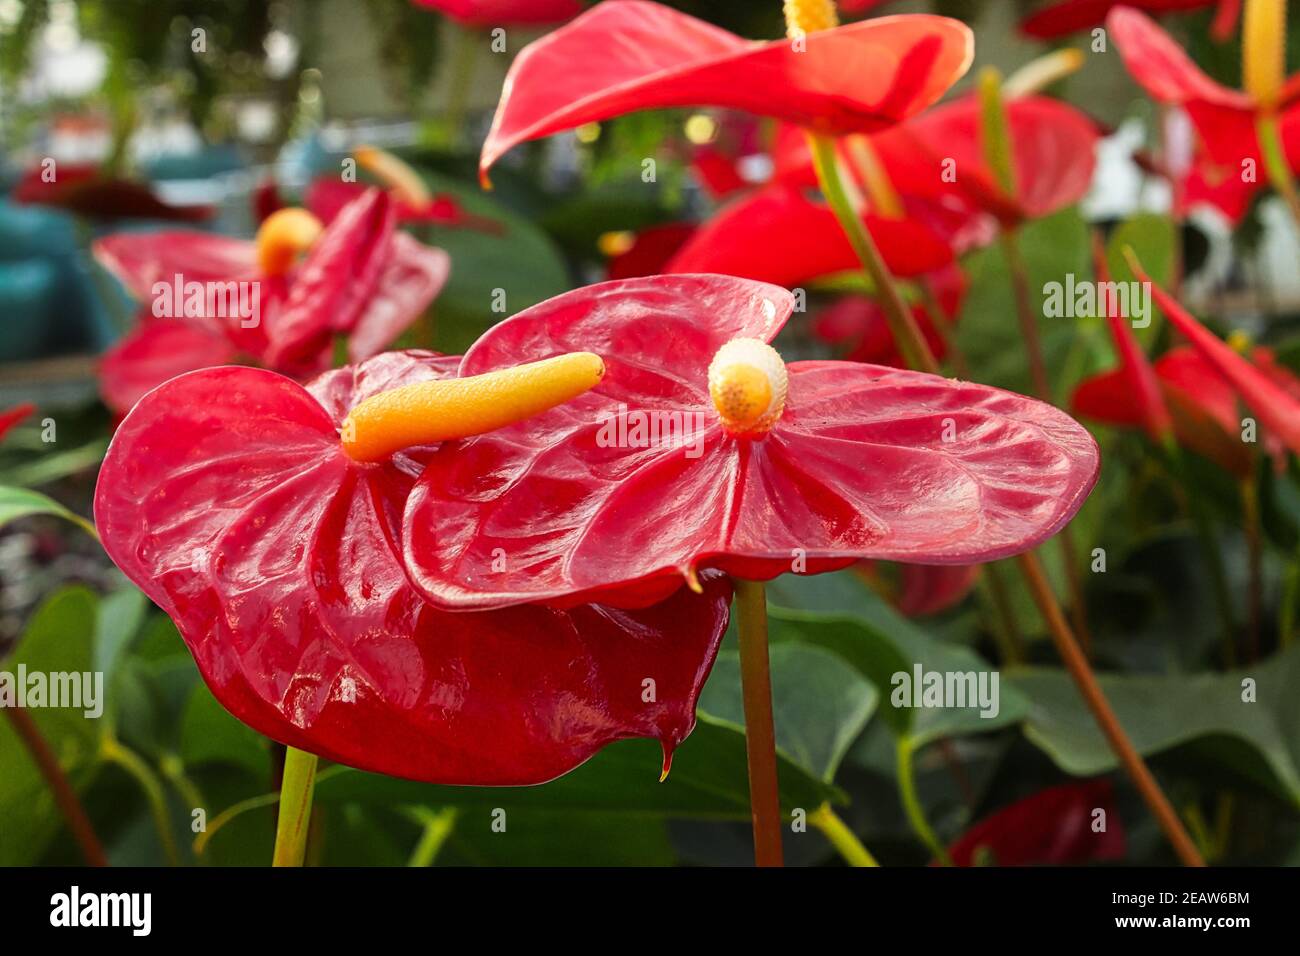 Closeup of colorful anthurium leaves on plants Stock Photo